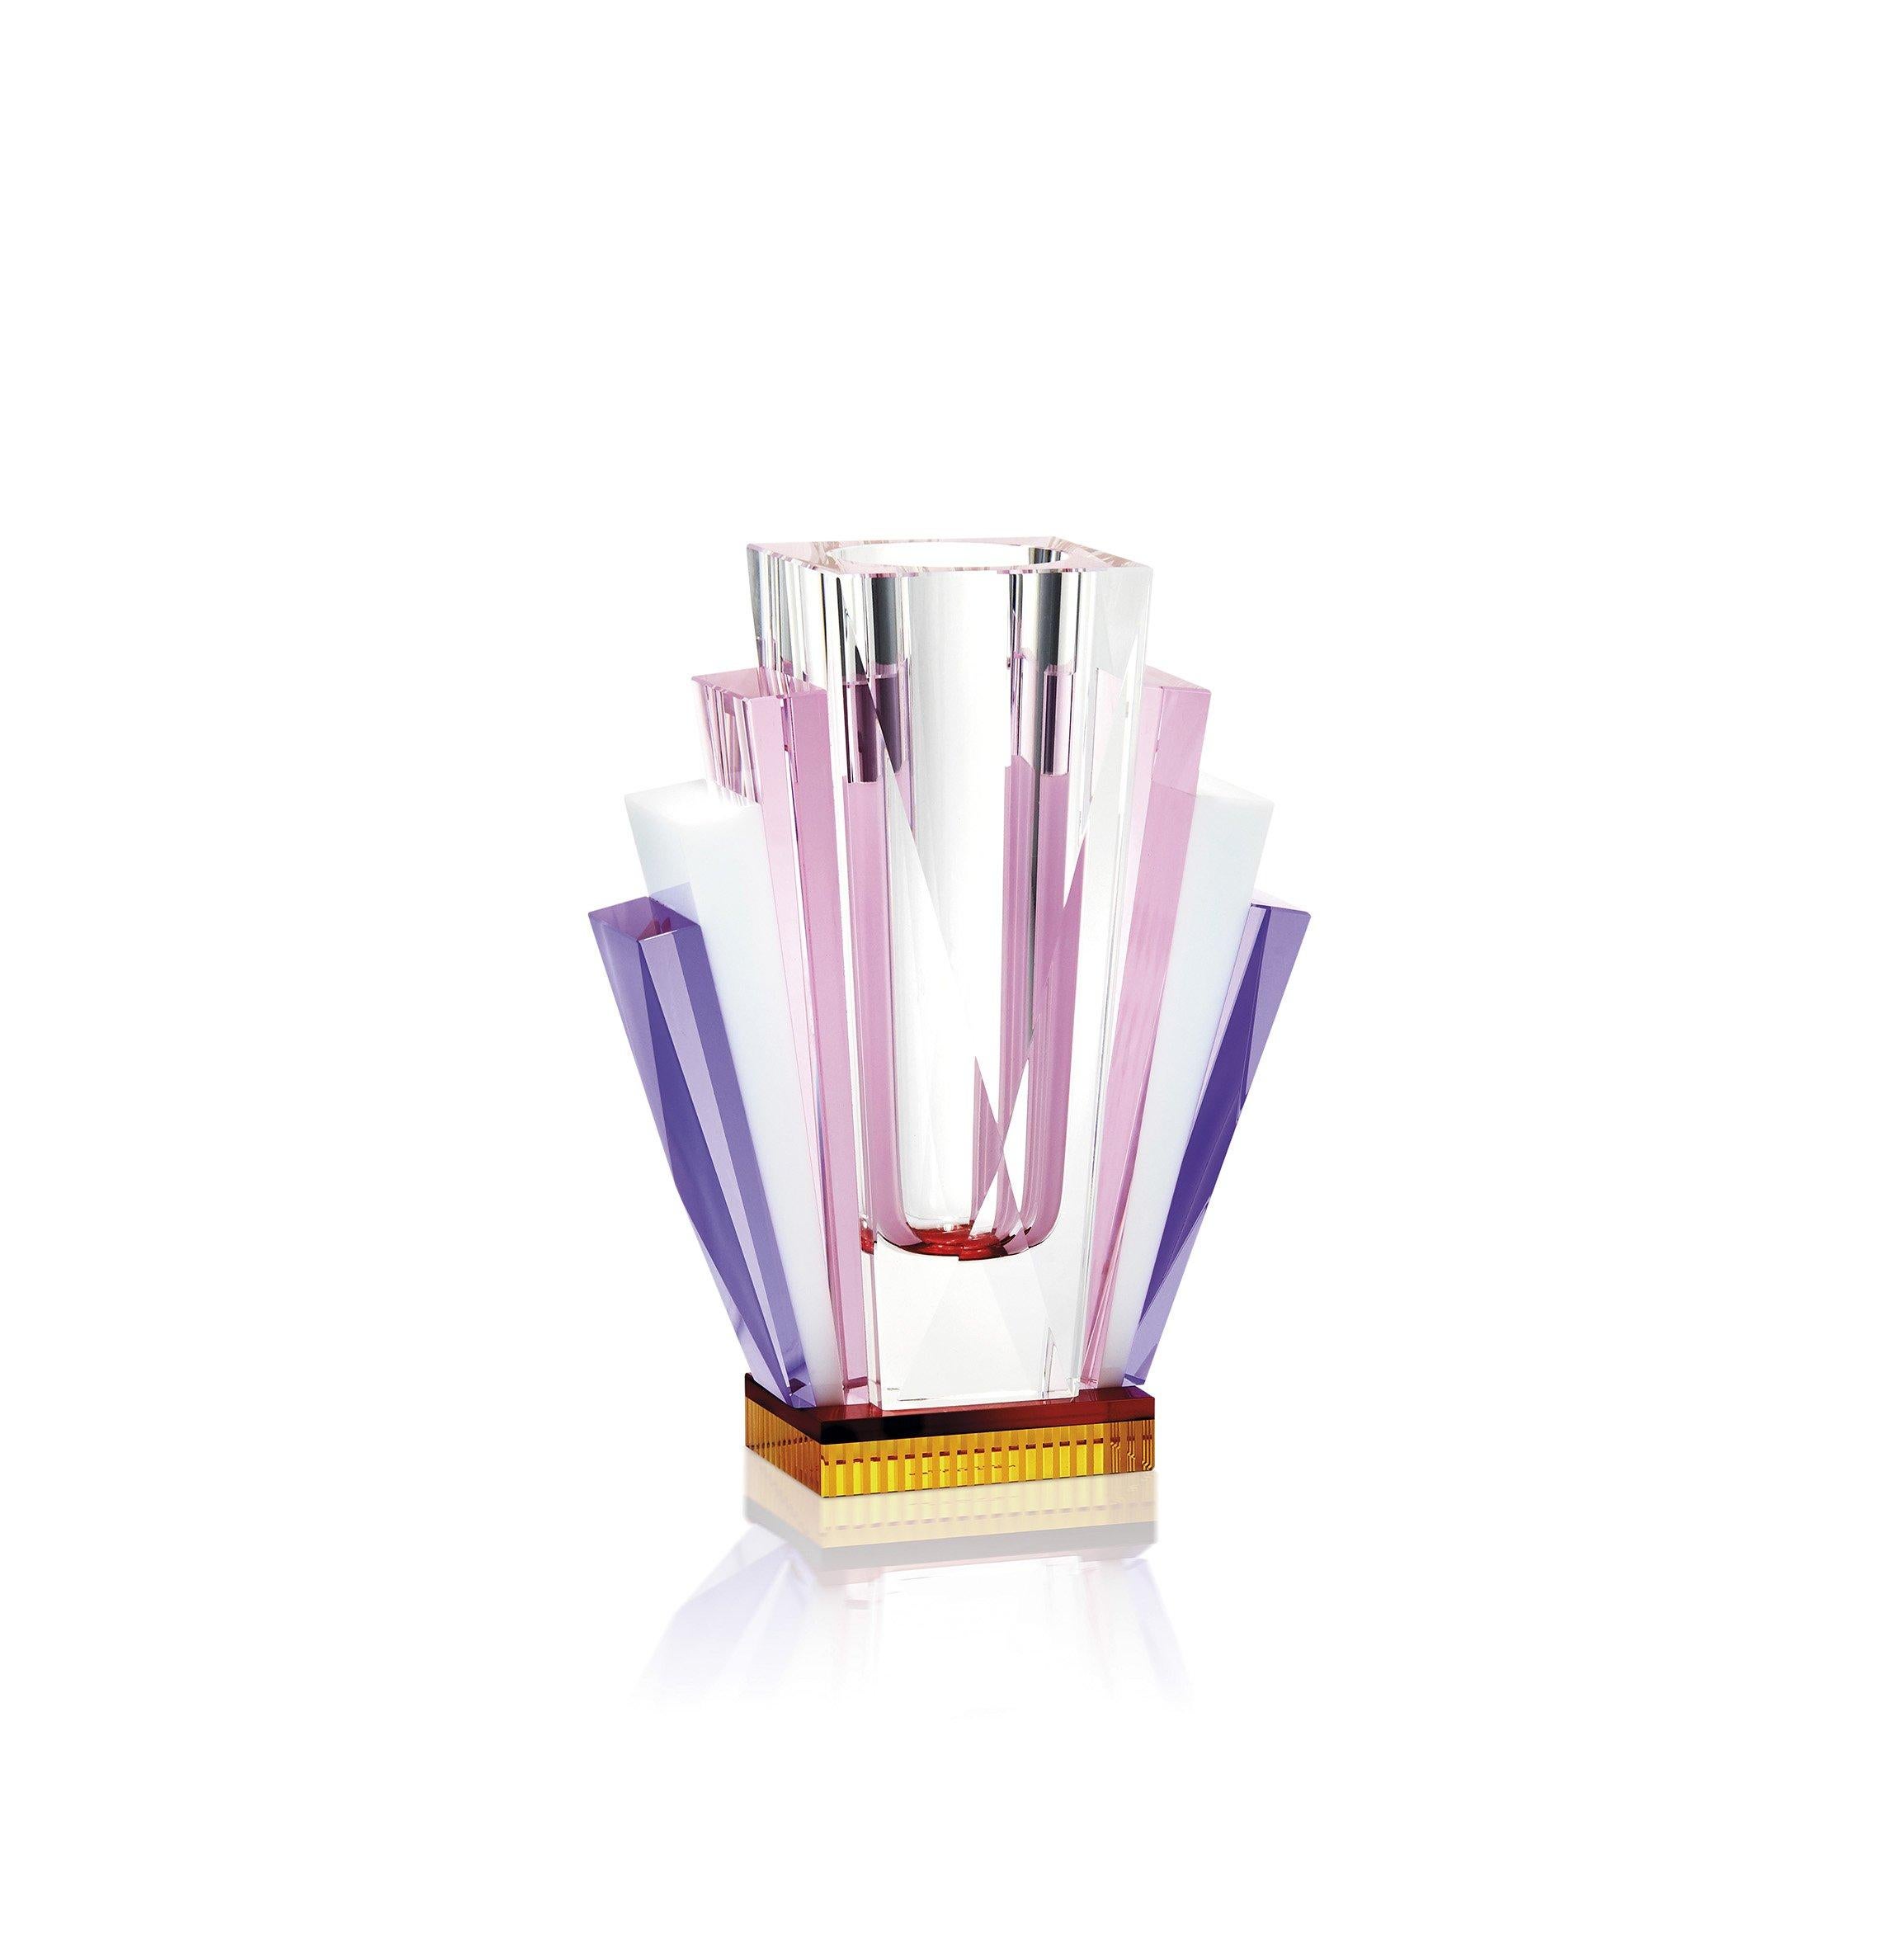 South Beach crystal vase, hand-sculpted contemporary crystal
Decorative vase
Hand-sculpted in crystal
Measures: W 17.5, H 23, D 8 cm

The Reflections Copenhagen handcrafted South Beach vase brings out a feeling of summer with a focal point on